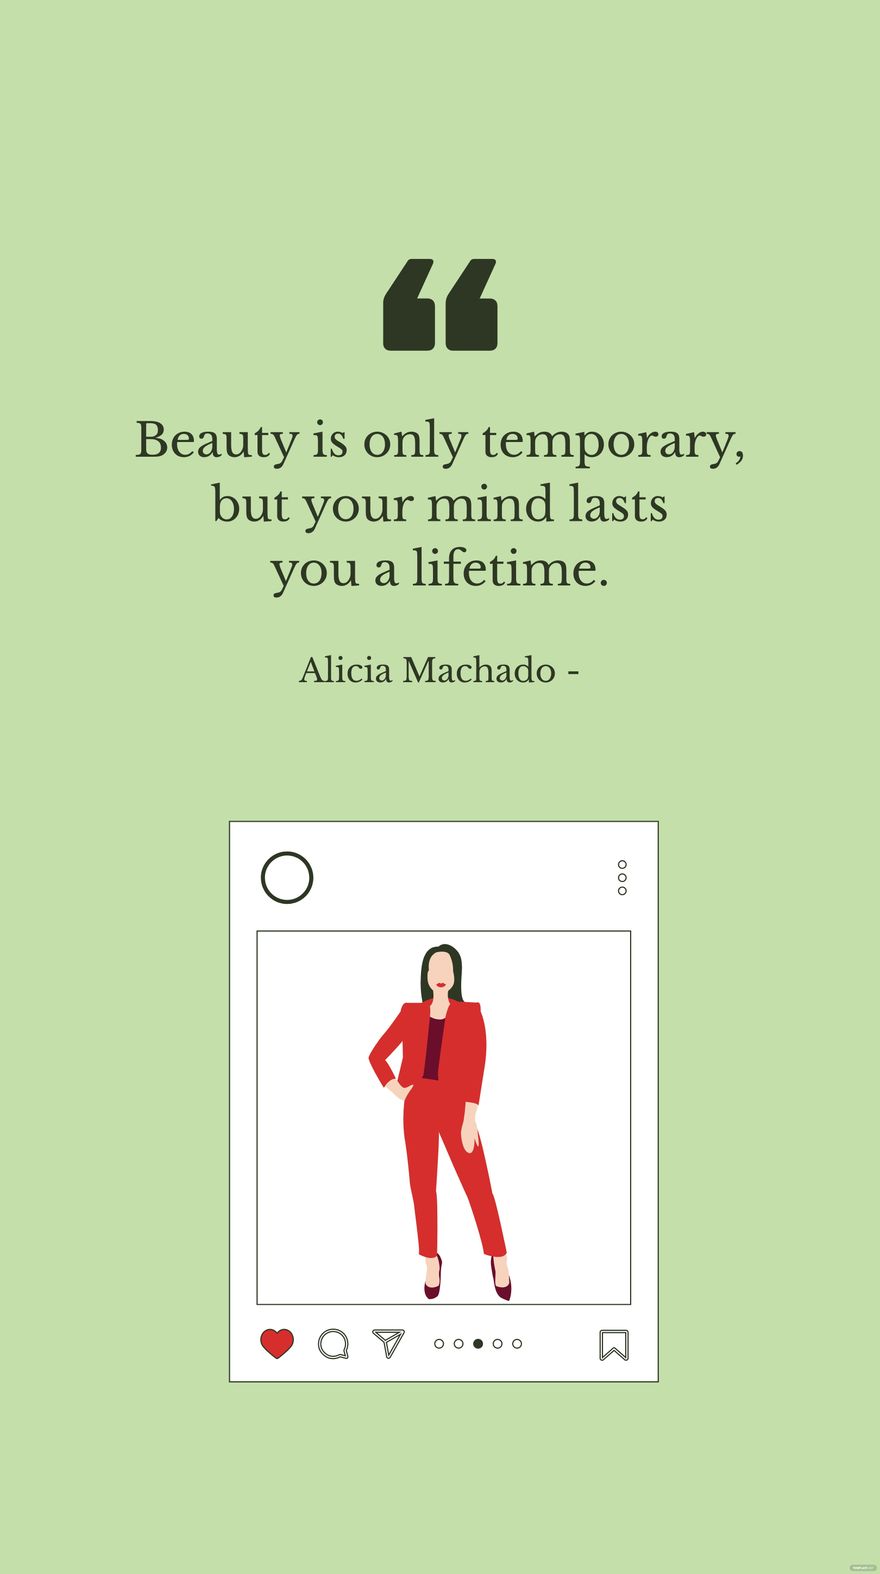 Alicia Machado - Beauty is only temporary, but your mind lasts you a lifetime. in JPG